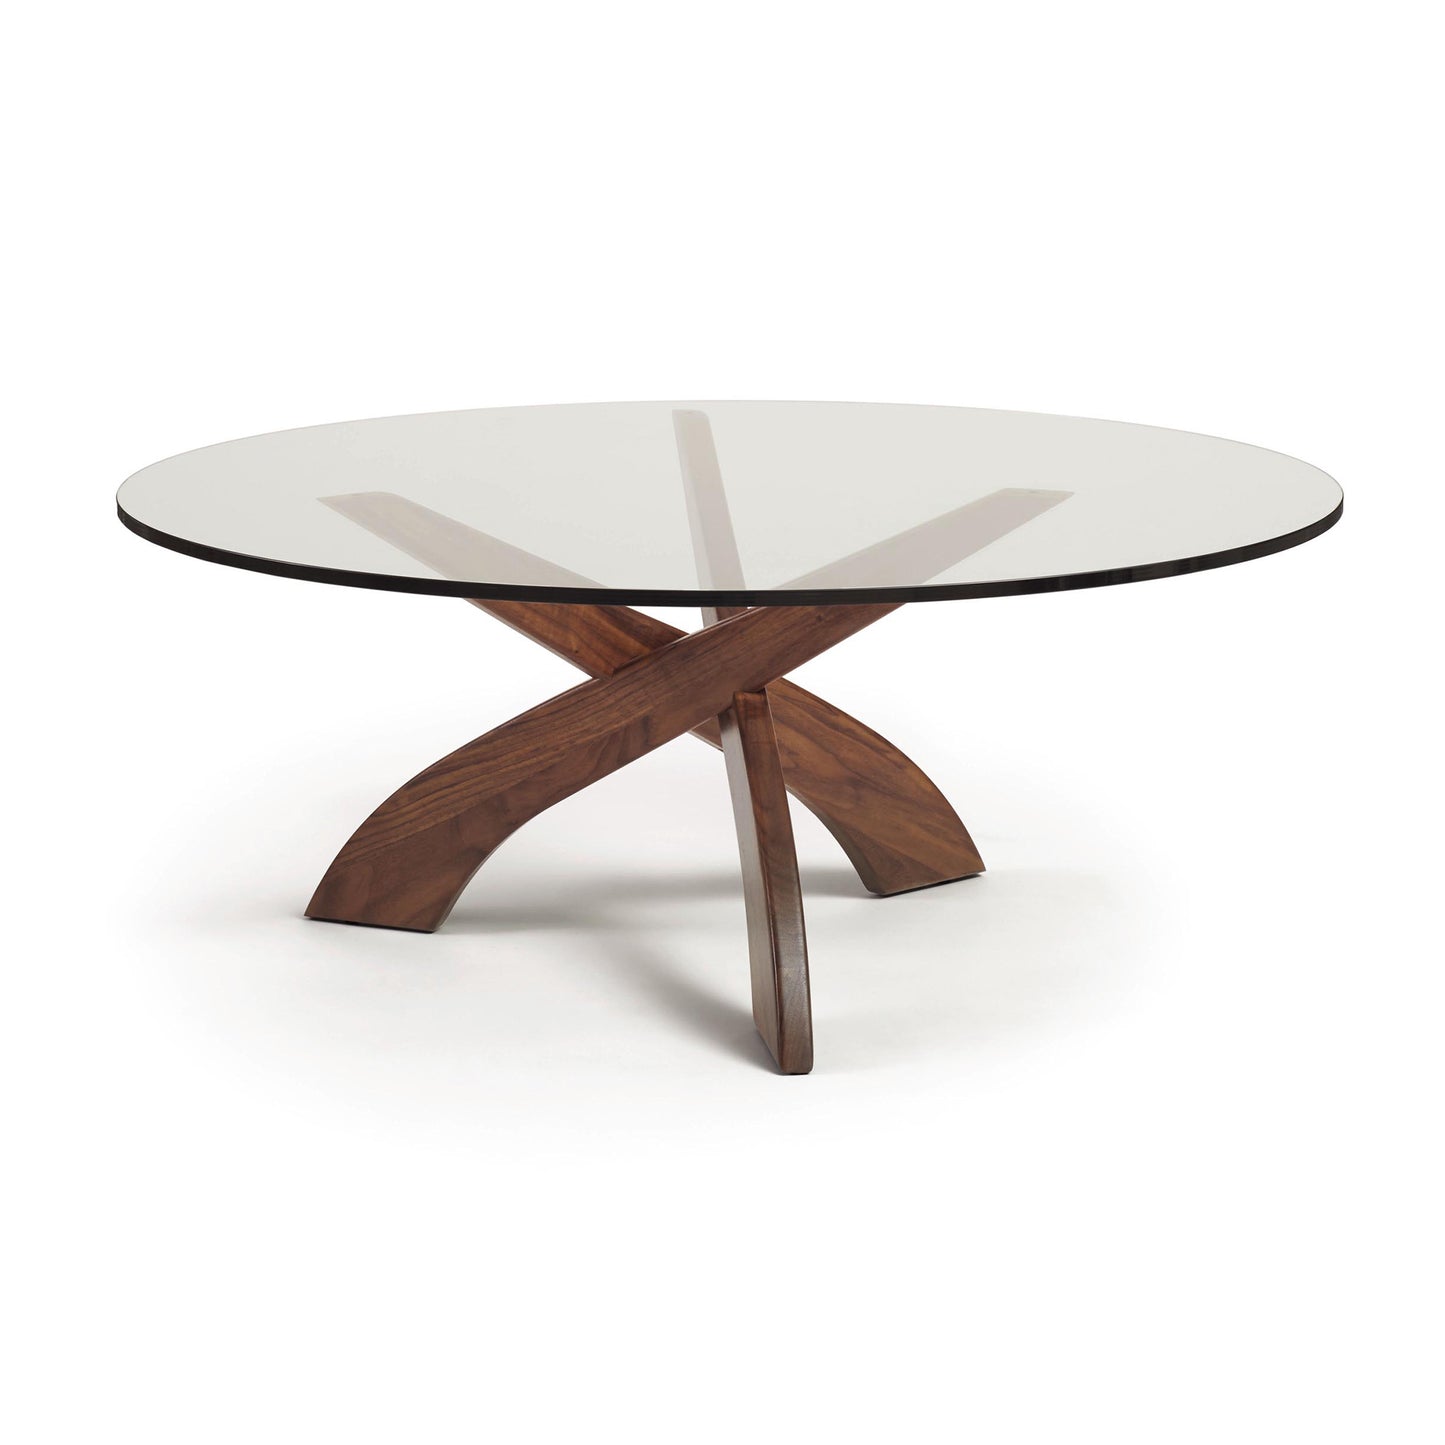 An Entwine Round Coffee Table with a glass top and wooden legs, ideal for any living room. (Brand Name: Copeland Furniture)